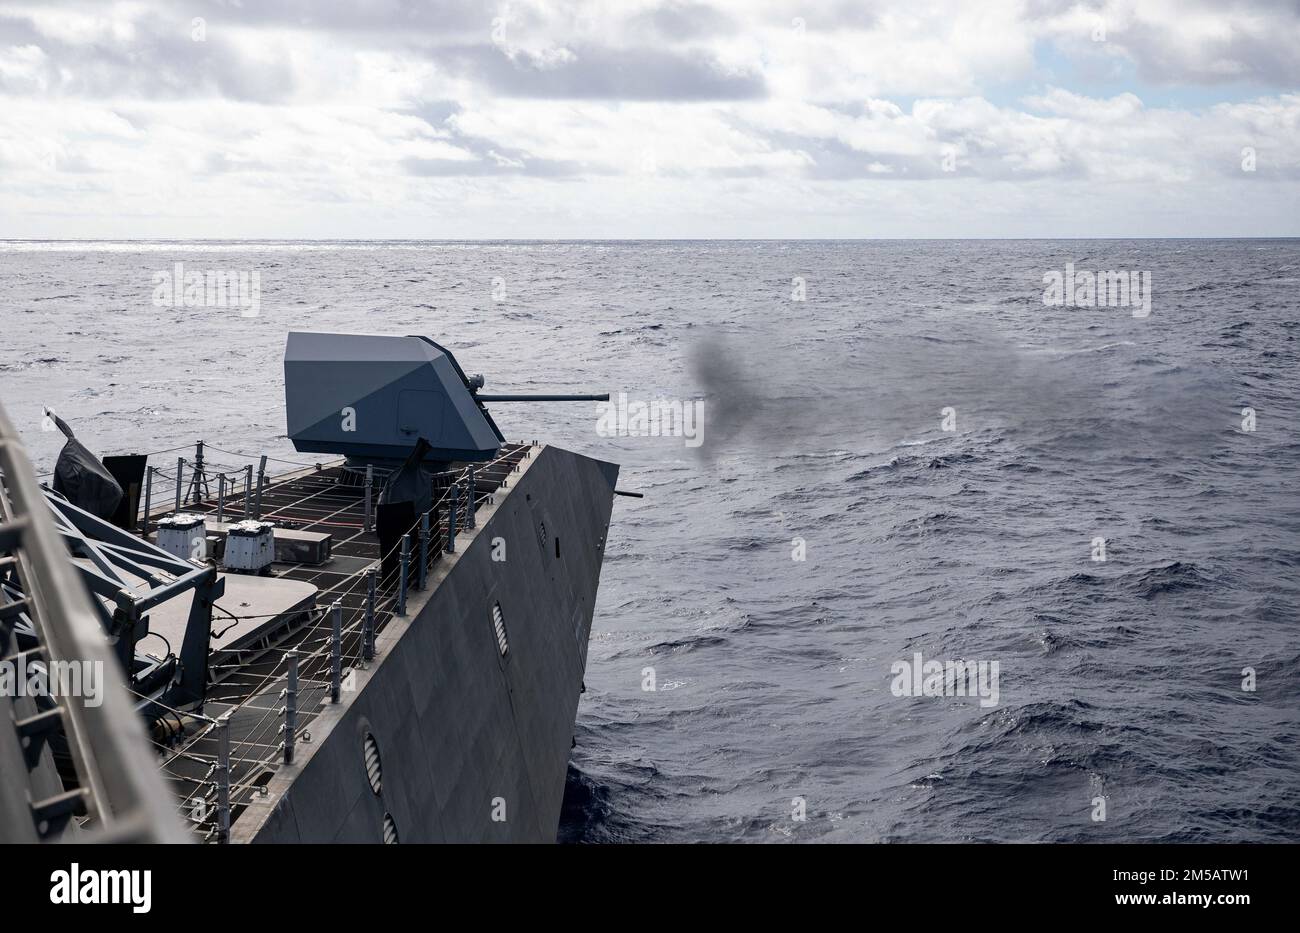 220217-N-LI768-1028  PHILIPPINE SEA (Feb. 17, 2022) – The Independence-variant littoral combat ship USS Tulsa (LCS 16) fires its MK110 57mm gun during a weapons exercise. Tulsa, part of Destroyer Squadron (DESRON) 7, is on a rotational deployment, operating in the U.S. 7th Fleet area of operations to enhance interoperability with partners and serve as a ready-response force in support of a free and open Indo-Pacific region. Stock Photo